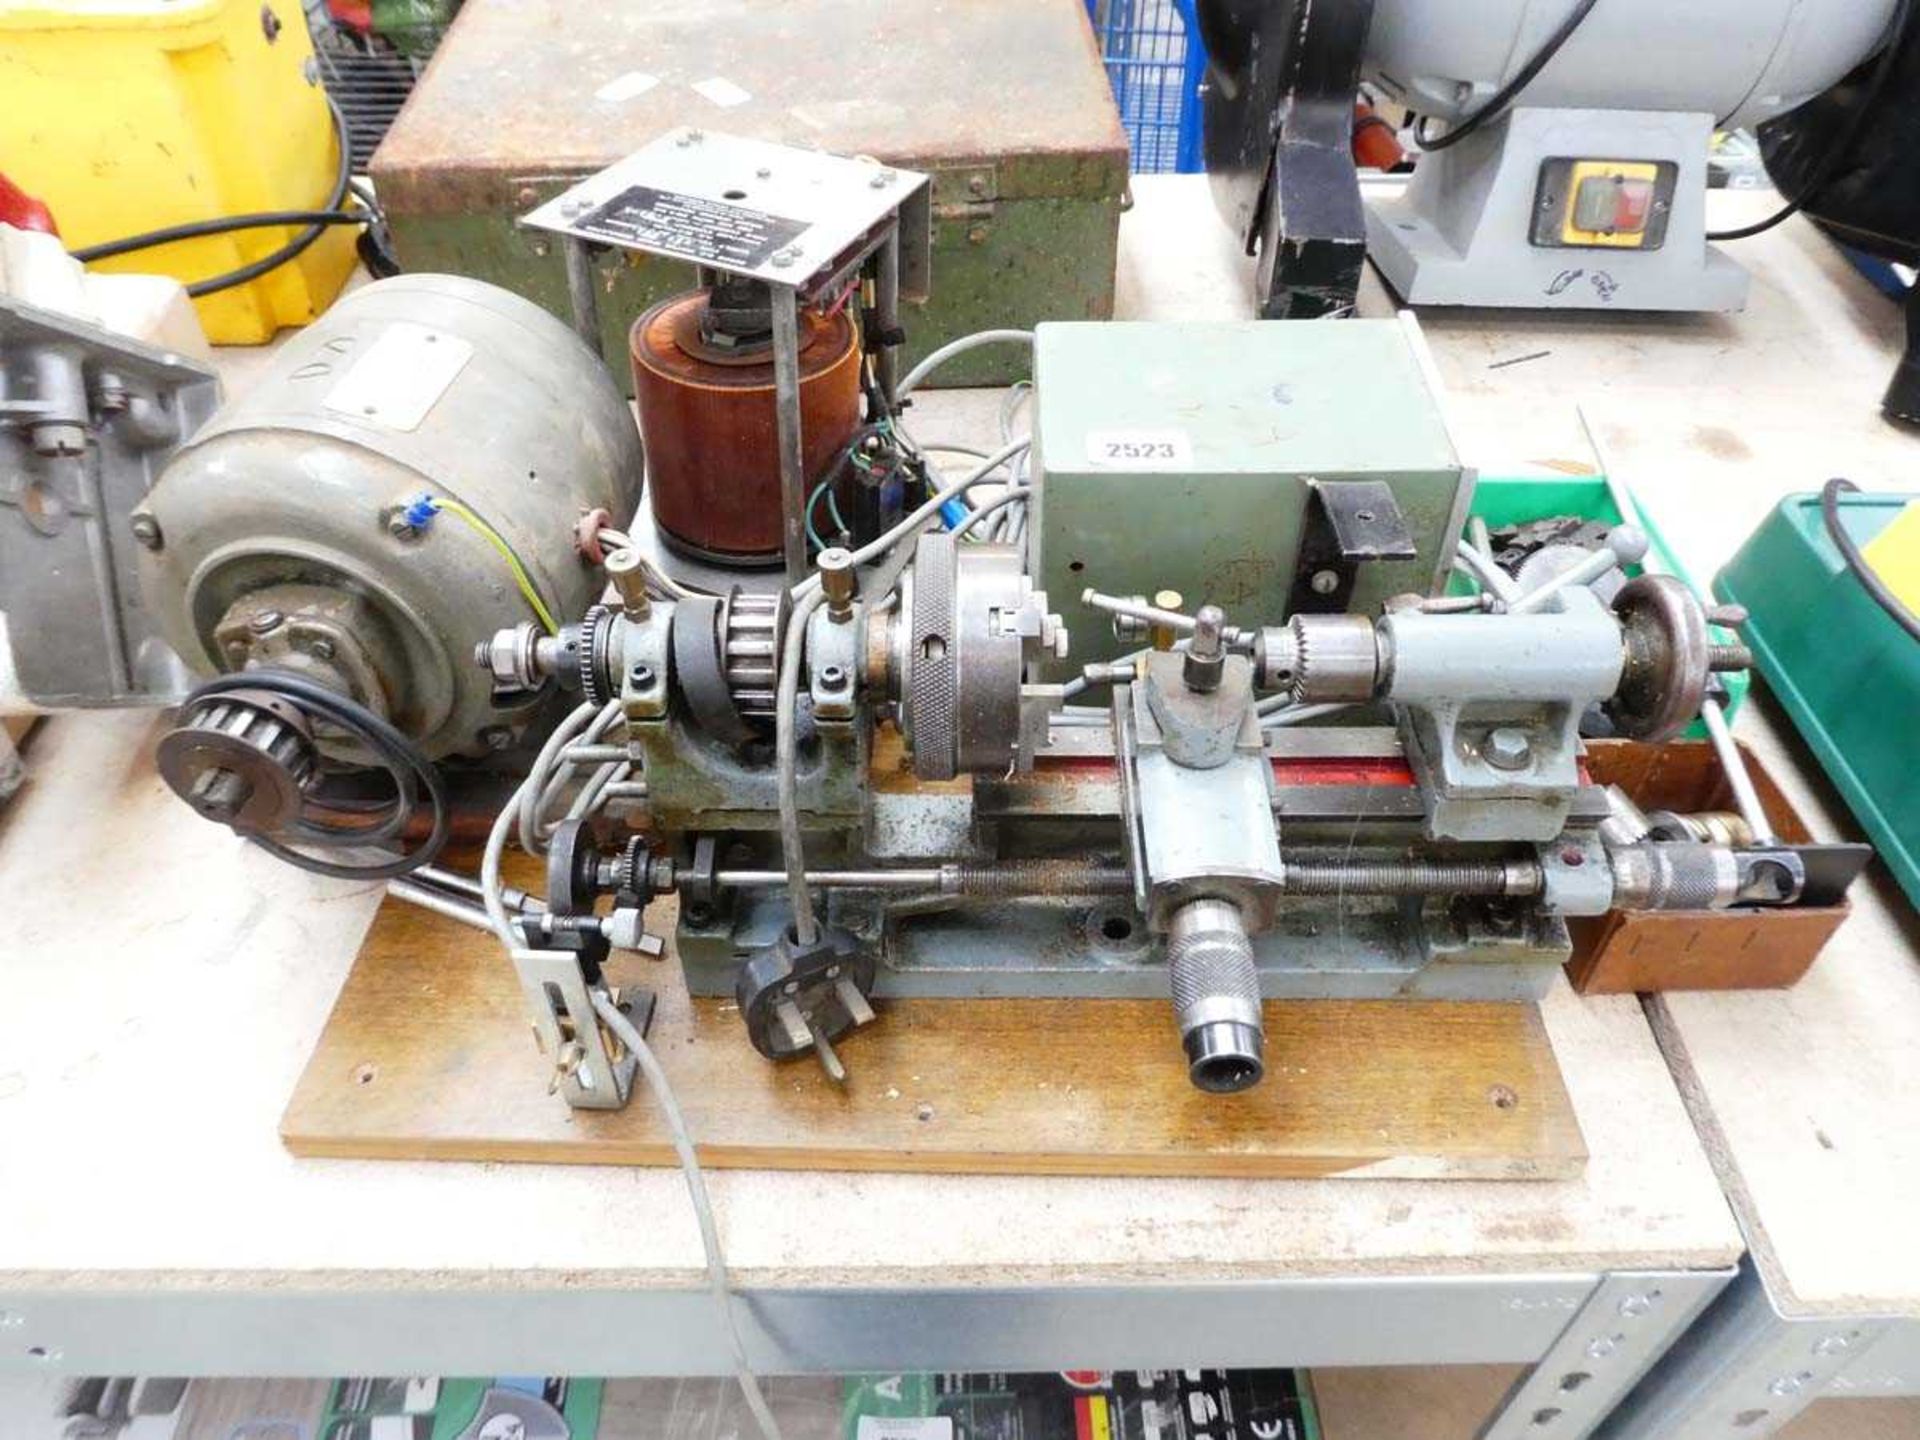 240V miniature lathe with various motors and parts